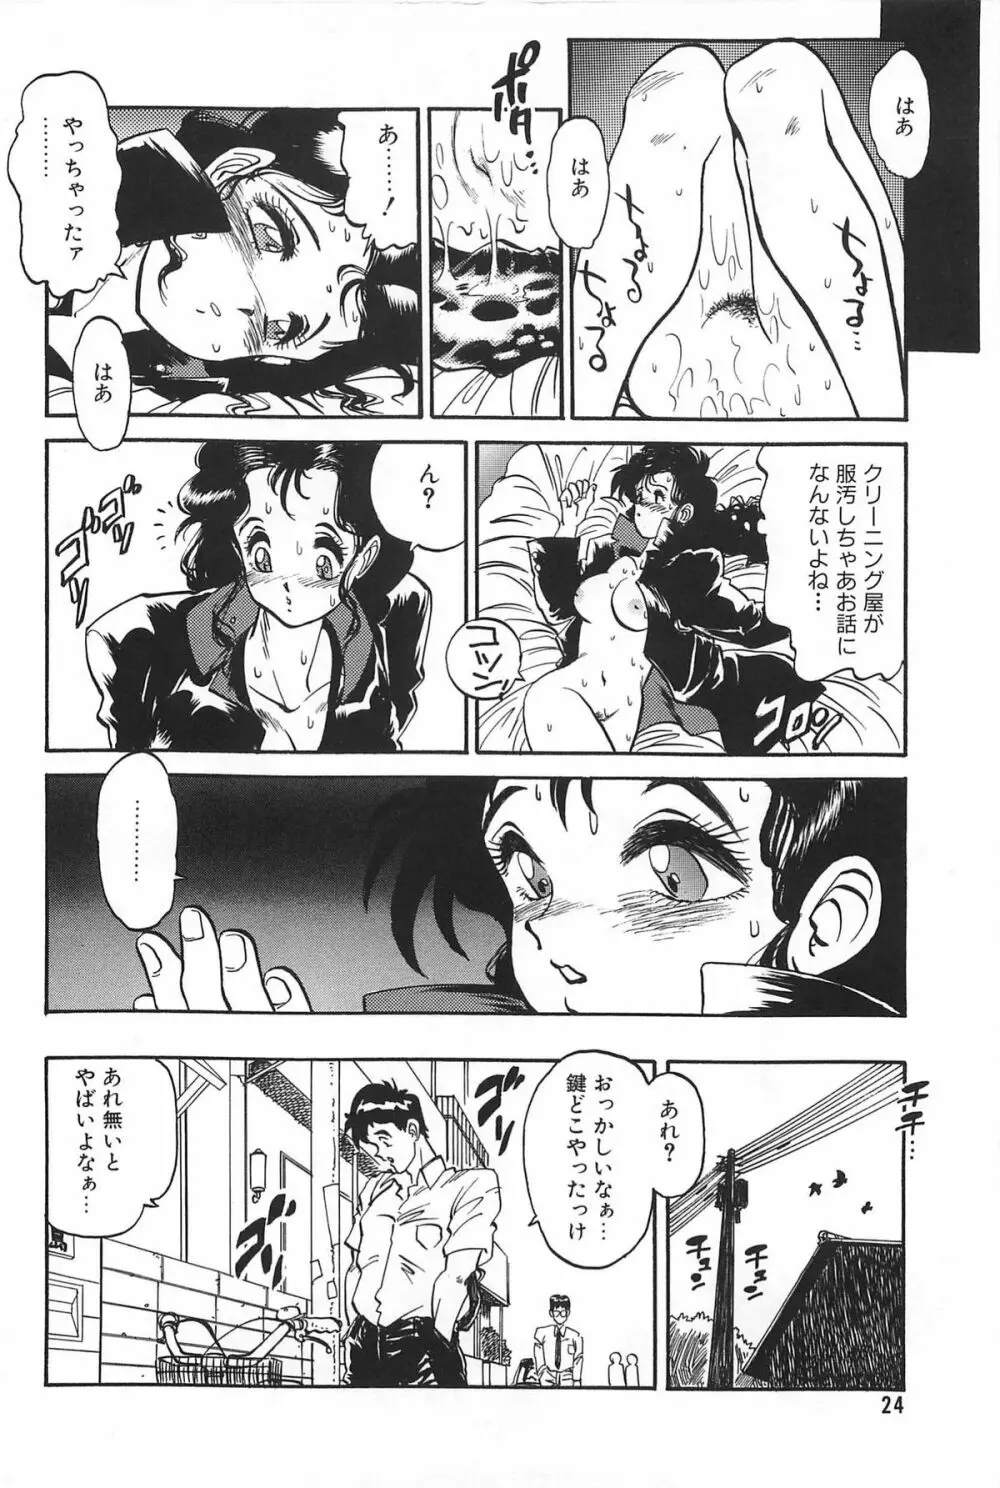 LOVE ME 1995 Page.26